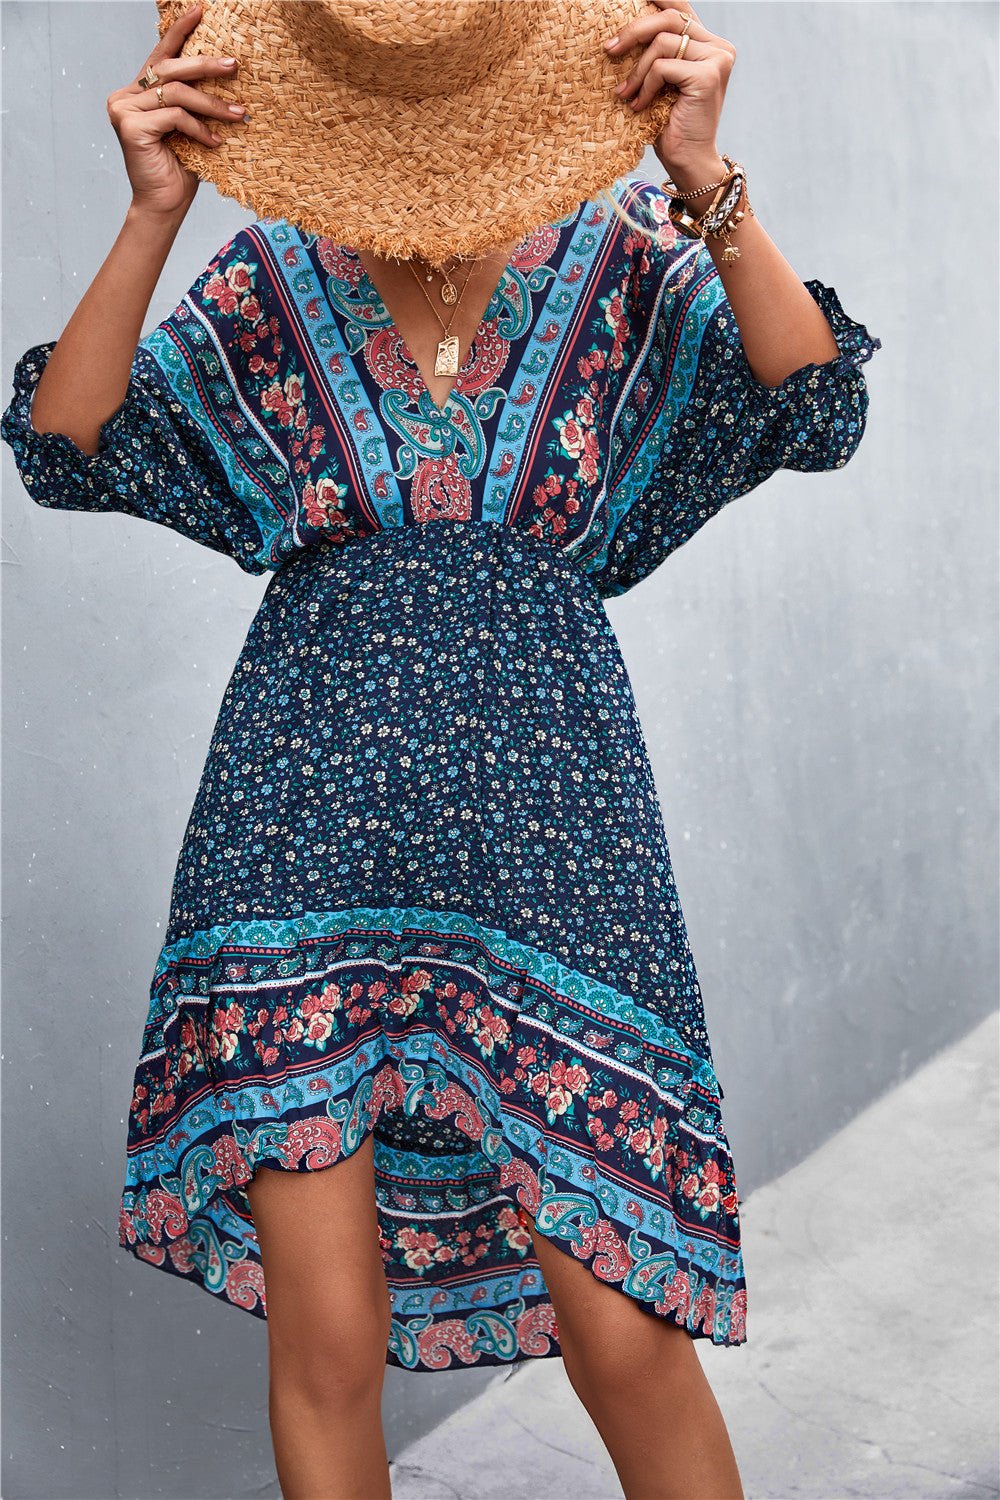 Bohemian Dreams - Indulge in the Art of Romance with our Printed V Neck Dress - Feel Like a Goddess, Embrace Your Inner Sultriness and Experience Unparalleled Comfort. - Guy Christopher